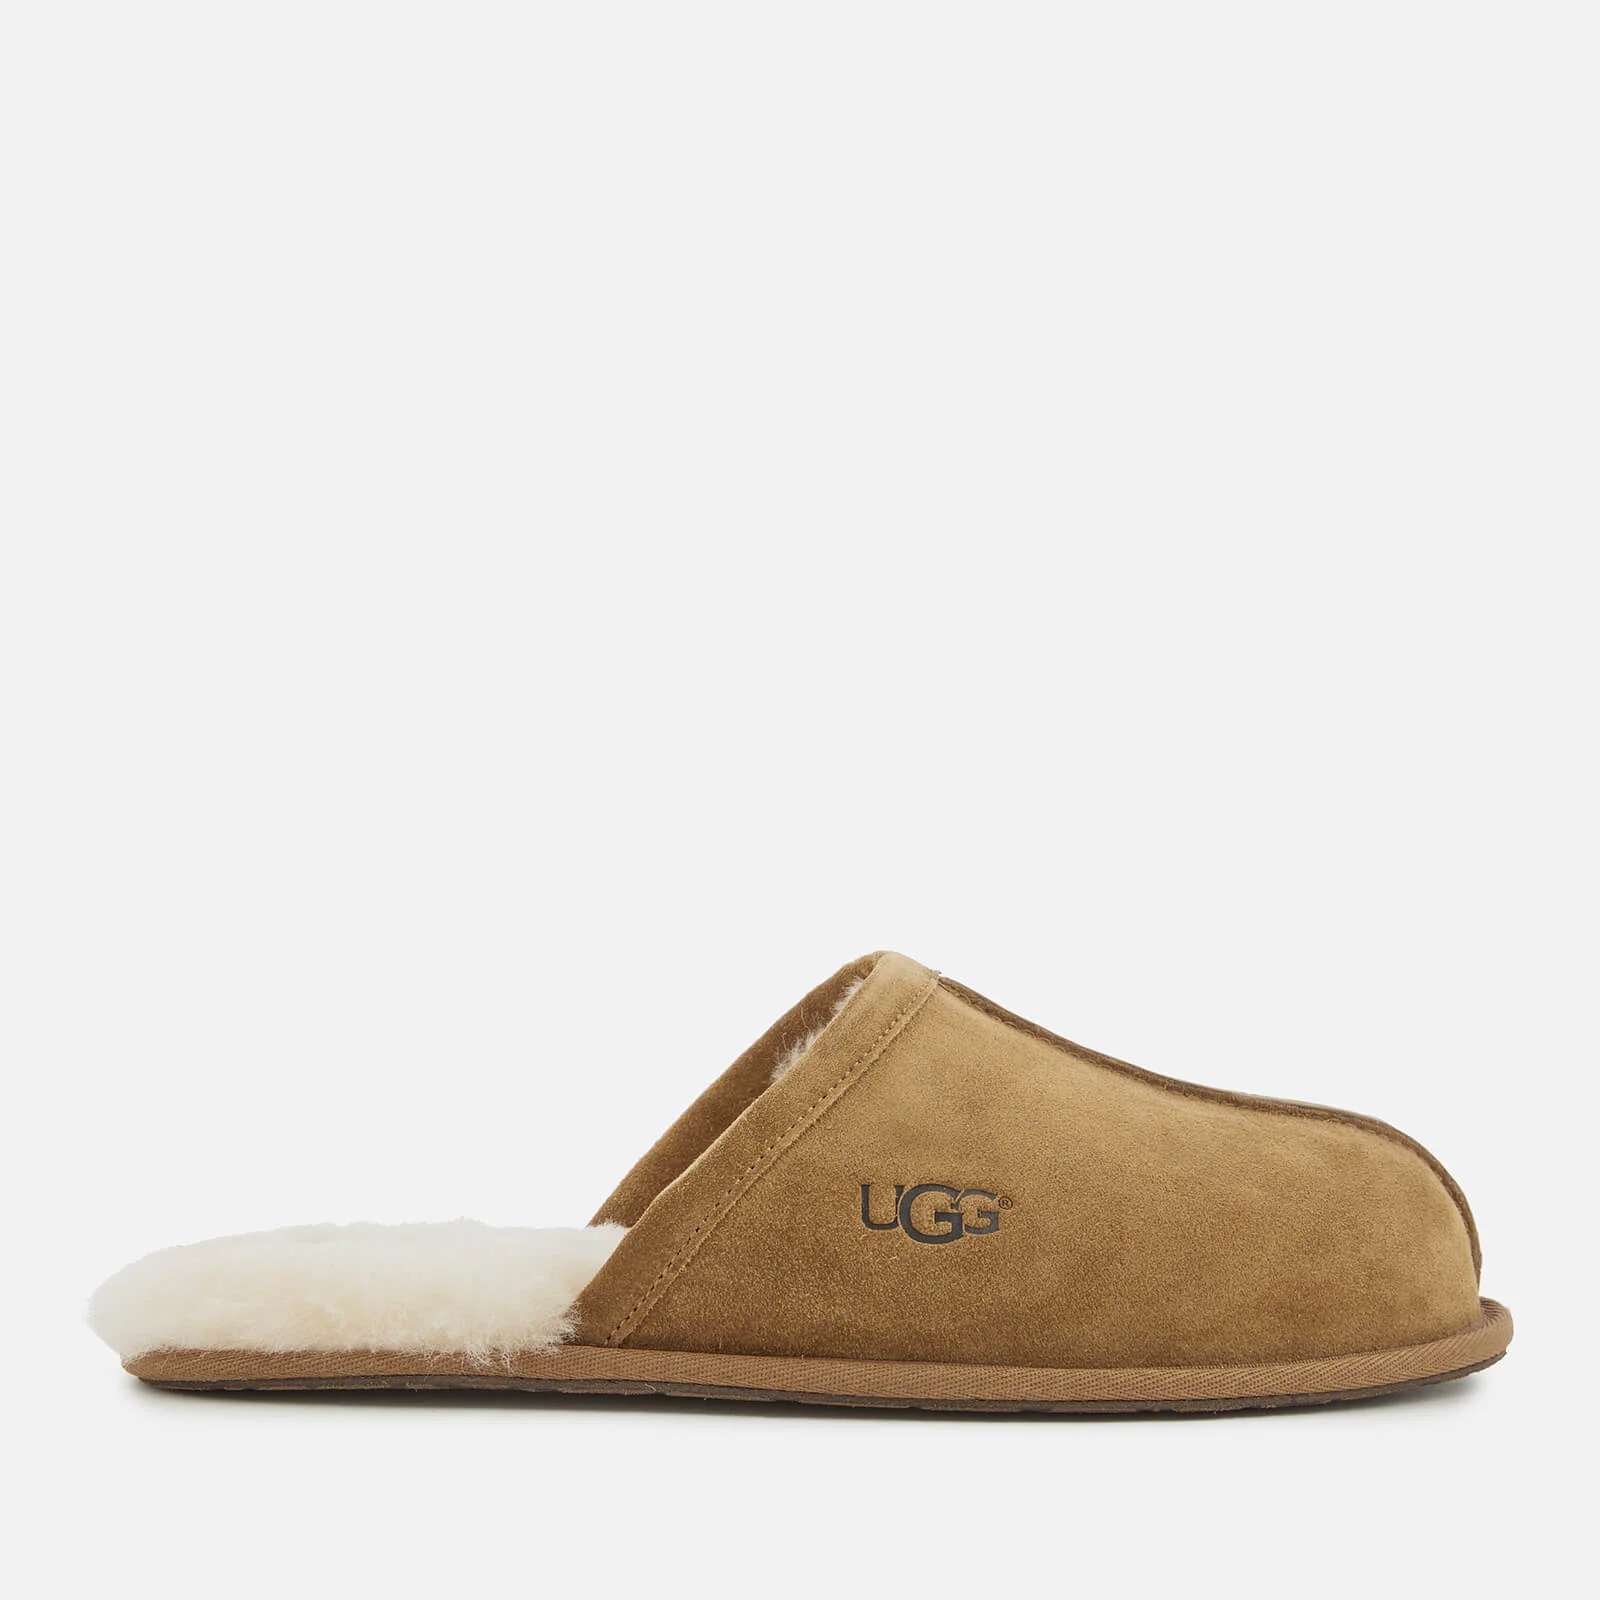 UGG Men's Scuff Suede Slippers - Chestnut (DO NOT USE) Image 1